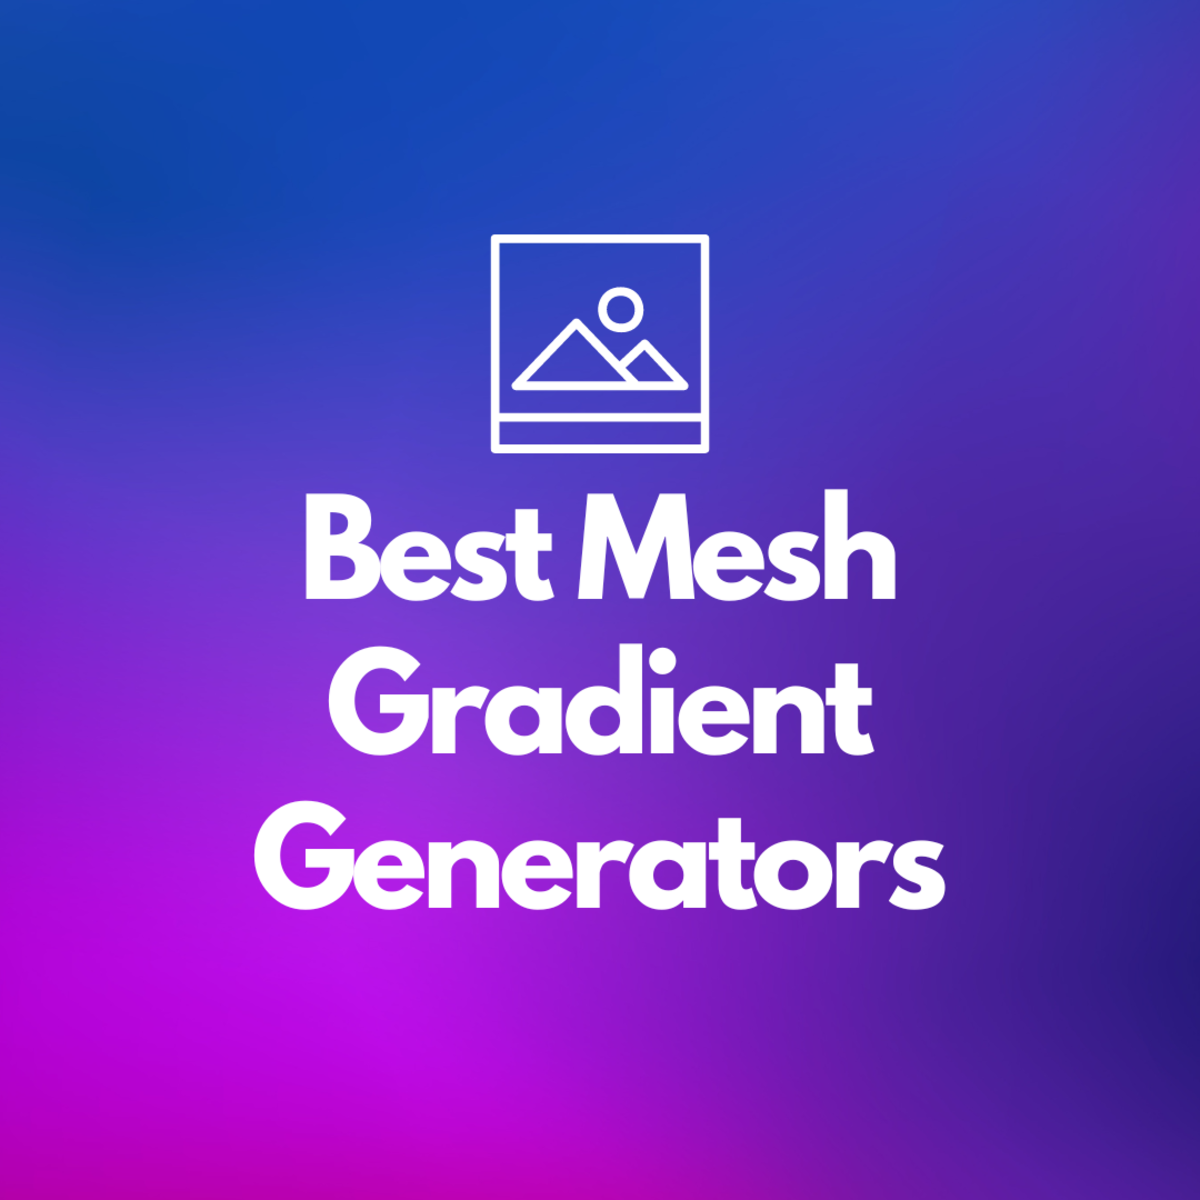 4 Best Mesh Gradient Generators to Check Out: The Ultimate List